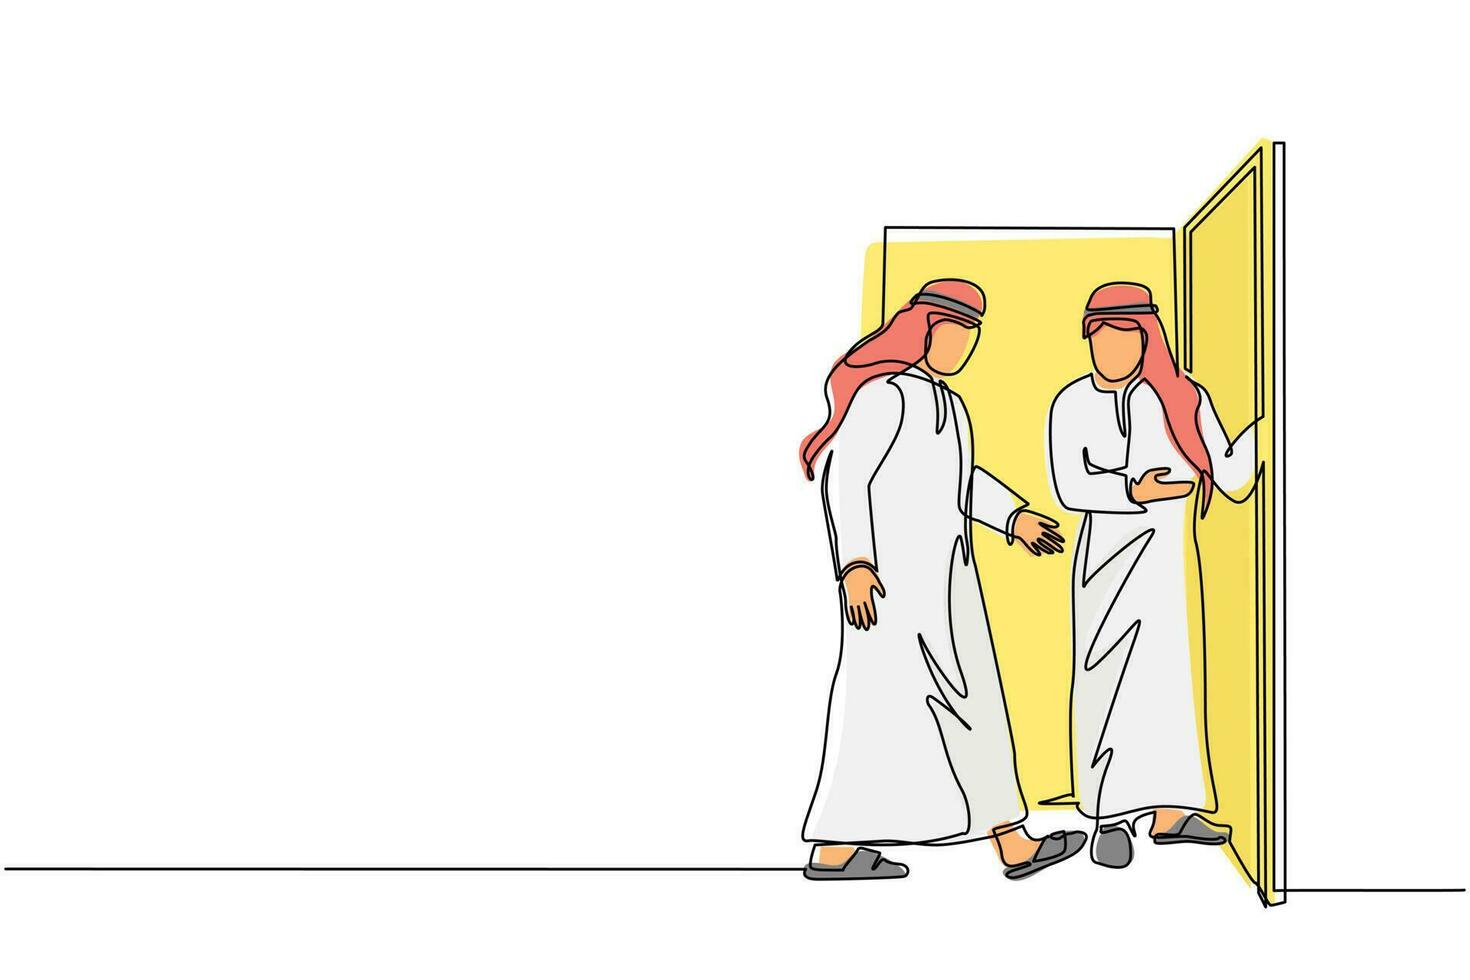 Single continuous line drawing Arab businessman at door welcomes his friend in. Man is inviting his friend to get into his house. Hospitality concept. One line draw graphic design vector illustration